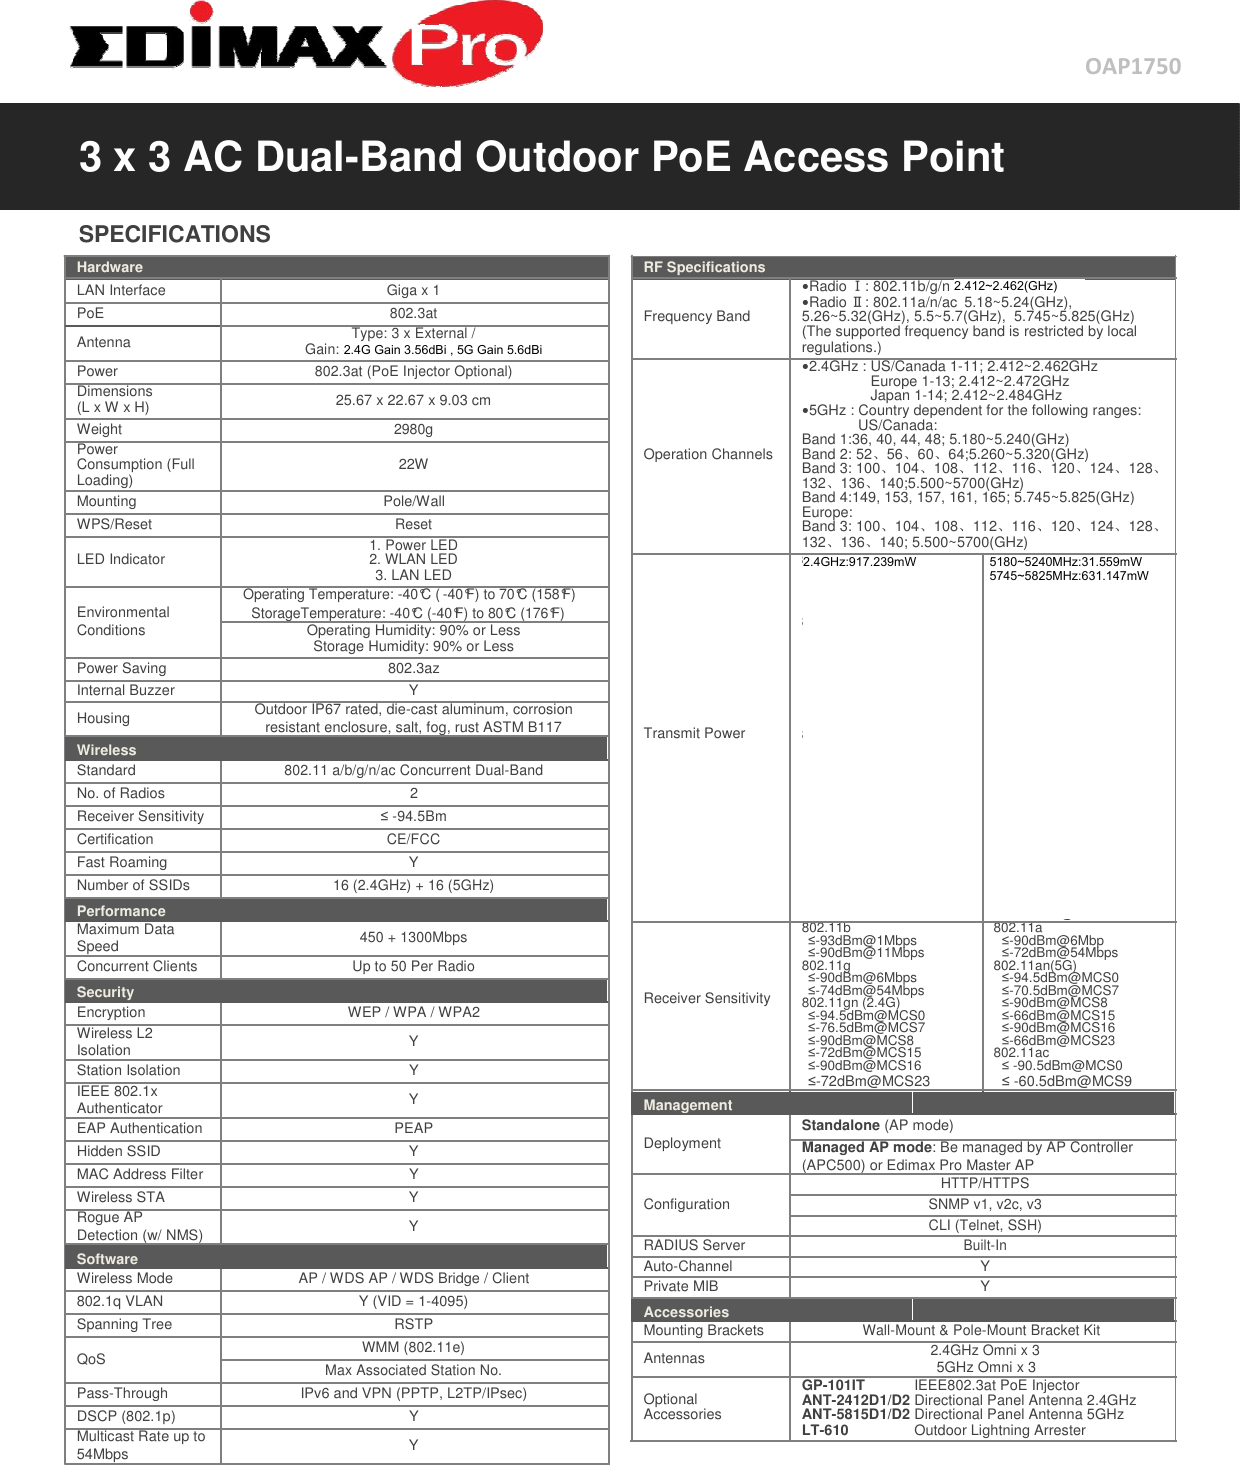 OAP1750   3 x 3 AC Dual-Band Outdoor PoE Access Point  SPECIFICATIONS  Hardware  LAN Interface Giga x 1       PoE 802.3at       Antenna Type: 3 x External /  Gain: 4dBi (2.4GHz), 6dBi (5GHz)         Power 802.3at (PoE Injector Optional)       Dimensions 25.67 x 22.67 x 9.03 cm  (L x W x H)         Weight 2980g       Power 22W  Consumption (Full  Loading)        Mounting  Pole/Wall       WPS/Reset Reset       LED Indicator 1. Power LED  2. WLAN LED   3. LAN LED        Operating Temperature: -40°C (-40°F) to 70°C (158°F)  Environmental StorageTemperature: -40°C (-40°F) to 80°C (176°F)  Conditions Operating Humidity: 90% or Less   Storage Humidity: 90% or Less       Power Saving  802.3az       Internal Buzzer Y       Housing Outdoor IP67 rated, die-cast aluminum, corrosion  resistant enclosure, salt, fog, rust ASTM B117    Wireless   Standard 802.11 a/b/g/n/ac Concurrent Dual-Band       No. of Radios  2       Receiver Sensitivity ≤ -94.5Bm       Certification CE/FCC       Fast Roaming  Y       Number of SSIDs 16 (2.4GHz) + 16 (5GHz)       Performance    Maximum Data 450 + 1300Mbps  Speed    Concurrent Clients Up to 50 Per Radio       Security    Encryption  WEP / WPA / WPA2       Wireless L2 Y  Isolation    Station Isolation  Y       IEEE 802.1x Y  Authenticator    EAP Authentication  PEAP       Hidden SSID  Y       MAC Address Filter  Y       Wireless STA  Y       Rogue AP Y  Detection (w/ NMS)    Software   Wireless Mode  AP / WDS AP / WDS Bridge / Client       802.1q VLAN  Y (VID = 1-4095)       Spanning Tree  RSTP       QoS WMM (802.11e)     Max Associated Station No.         Pass-Through  IPv6 and VPN (PPTP, L2TP/IPsec)       DSCP (802.1p)  Y       Multicast Rate up to Y  54Mbps       RF Specifications   •Radio Ⅰ: 802.11b/g/n  2.412~2.484(GHz)   •Radio Ⅱ: 802.11a/n/ac 5.18~5.24(GHz),  Frequency Band 5.26~5.32(GHz), 5.5~5.7(GHz),  5.745~5.825(GHz)   (The supported frequency band is restricted by local   regulations.)             •2.4GHz : US/Canada 1-11; 2.412~2.462GHz   Europe 1-13; 2.412~2.472GHz   Japan 1-14; 2.412~2.484GHz   •5GHz : Country dependent for the following ranges:   US/Canada:      Band 1:36, 40, 44, 48; 5.180~5.240(GHz)  Operation Channels Band 2: 52566064;5.260~5.320(GHz)   Band 3: 100104108112116120124128   132136140;5.500~5700(GHz)   Band 4:149, 153, 157, 161, 165; 5.745~5.825(GHz)   Europe:        Band 3: 100104108112116120124128   132136140; 5.500~5700(GHz)         802.11b    802.11a   23dBm@1Mbps    22dBm@6Mbps   23dBm@2Mbps    22dBm@9Mbps   23dBm@5.5Mbps  22dBm@12Mbps   23dBm@11Mbps  22dBm@18Mbps   802.11g    22dBm@24Mbps   23dBm@6Mbps    21dBm@36Mbps   23dBm@9Mbps    19dBm@48Mbps   23dBm@12Mbps  18dBm@54Mbps   23dBm@18Mbps  802.11an(5G)   23dBm@24Mbps  27.5dBm@MCS0/8/16   22dBm@36Mbps  26.5dBm@MCS1/9/17   20dBm@48Mbps  26.5dBm@MCS2/10/18  Transmit Power 19dBm@54Mbps  25.5dBm@MCS3/11/19  802.11gn (2.4G)    25.5dBm@MCS4/12/20   27.5dBm@MCS0/8/16  24.5dBm@MCS5/13/21   26.5dBm@MCS1/9/17  23.5dBm@MCS6/14/22   26.5dBm@MCS2/10/18  22.5dBm@MCS7/15/23   26.5dBm@MCS3/11/19  802.11ac   25.5dBm@MCS4/12/20  27.5dBm@MCS0   24.5dBm@MCS5/13/21  26.5dBm@MCS1   23.5dBm@MCS6/14/22  26.5dBm@MCS2   22.5dBm@MCS7/15/23  25.5dBm@MCS3         25.5dBm@MCS4         24.5dBm@MCS5         23.5dBm@MCS6         22.5dBm@MCS7         20.5dBm@MCS8          19.5dBm@MCS9   802.11b    802.11a   ≤-93dBm@1Mbps  ≤-90dBm@6Mbp   ≤-90dBm@11Mbps  ≤-72dBm@54Mbps   802.11g    802.11an(5G)   ≤-90dBm@6Mbps  ≤-94.5dBm@MCS0  Receiver Sensitivity ≤-74dBm@54Mbps  ≤-70.5dBm@MCS7  802.11gn (2.4G)    ≤-90dBm@MCS8       ≤-94.5dBm@MCS0  ≤-66dBm@MCS15   ≤-76.5dBm@MCS7  ≤-90dBm@MCS16   ≤-90dBm@MCS8  ≤-66dBm@MCS23   ≤-72dBm@MCS15  802.11ac   ≤-90dBm@MCS16  ≤ -90.5dBm@MCS0   ≤-72dBm@MCS23  ≤ -60.5dBm@MCS9  Management        Standalone (AP mode)     Deployment         Managed AP mode: Be managed by AP Controller     (APC500) or Edimax Pro Master AP     HTTP/HTTPS         Configuration  SNMP v1, v2c, v3            CLI (Telnet, SSH)         RADIUS Server  Built-In           Auto-Channel    Y           Private MIB    Y             Accessories        Mounting Brackets Wall-Mount &amp; Pole-Mount Bracket Kit         Antennas  2.4GHz Omni x 3   5GHz Omni x 3      Optional GP-101IT IEEE802.3at PoE Injector  ANT-2412D1/D2 Directional Panel Antenna 2.4GHz  Accessories ANT-5815D1/D2 Directional Panel Antenna 5GHz   LT-610 Outdoor Lightning Arrester                          2.4GHz:917.239mW5180~5240MHz:31.559mW5745~5825MHz:631.147mW2.412~2.462(GHz)2.4G Gain 3.56dBi , 5G Gain 5.6dBi